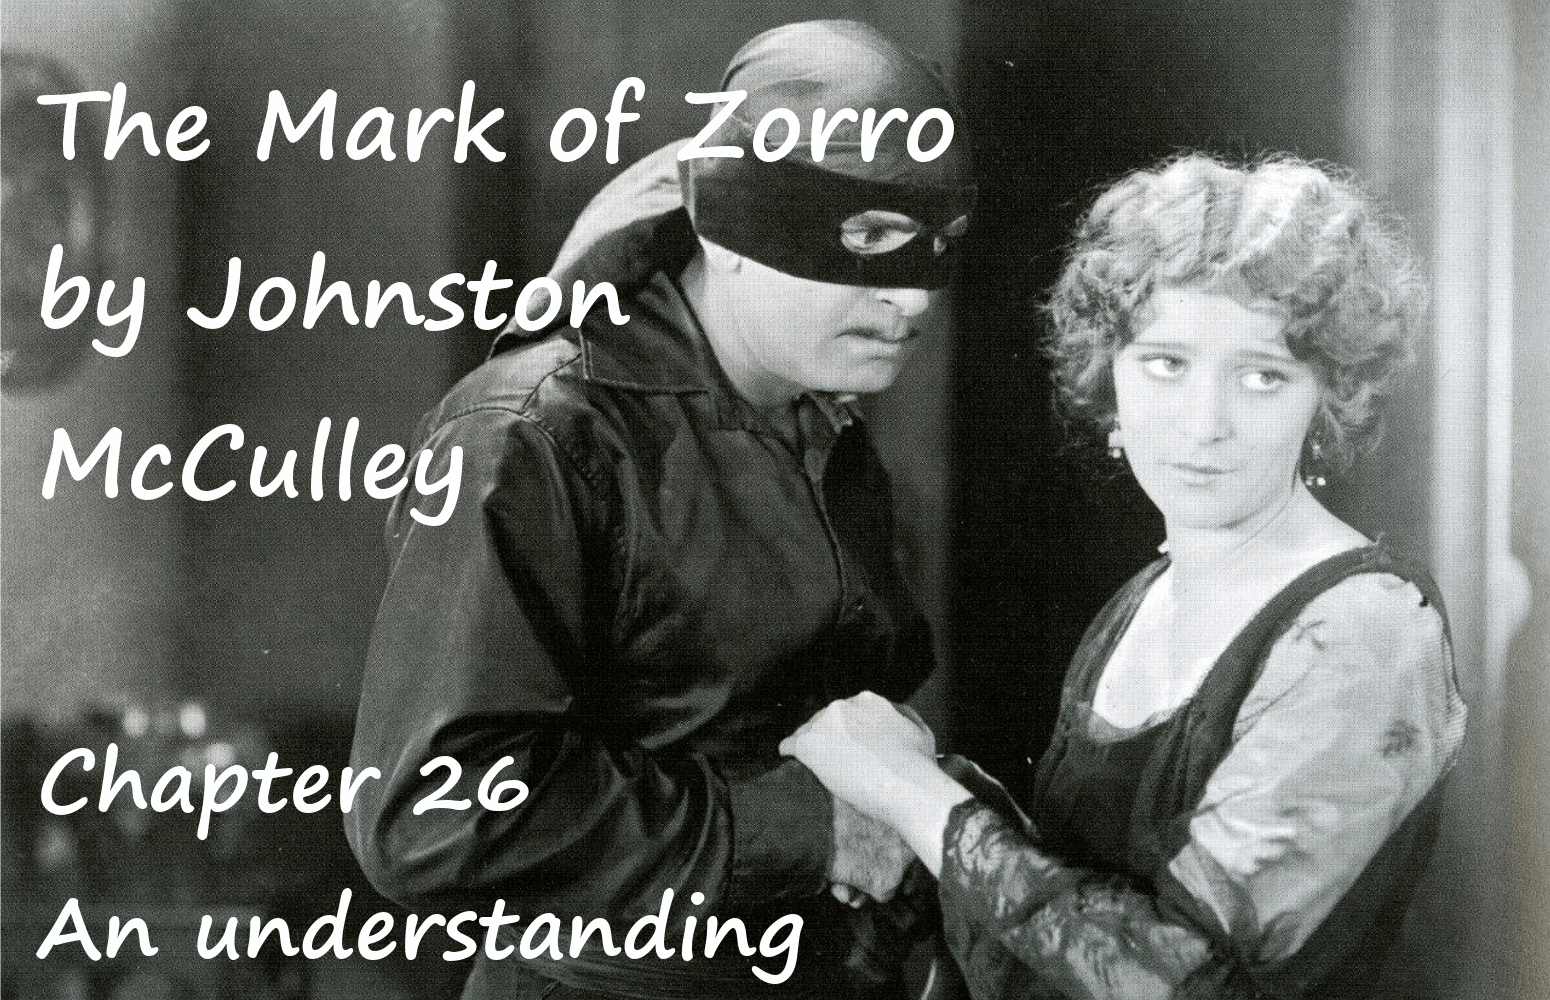 The Mark of Zorro chapter 26 An understanding by Johnston McCulley